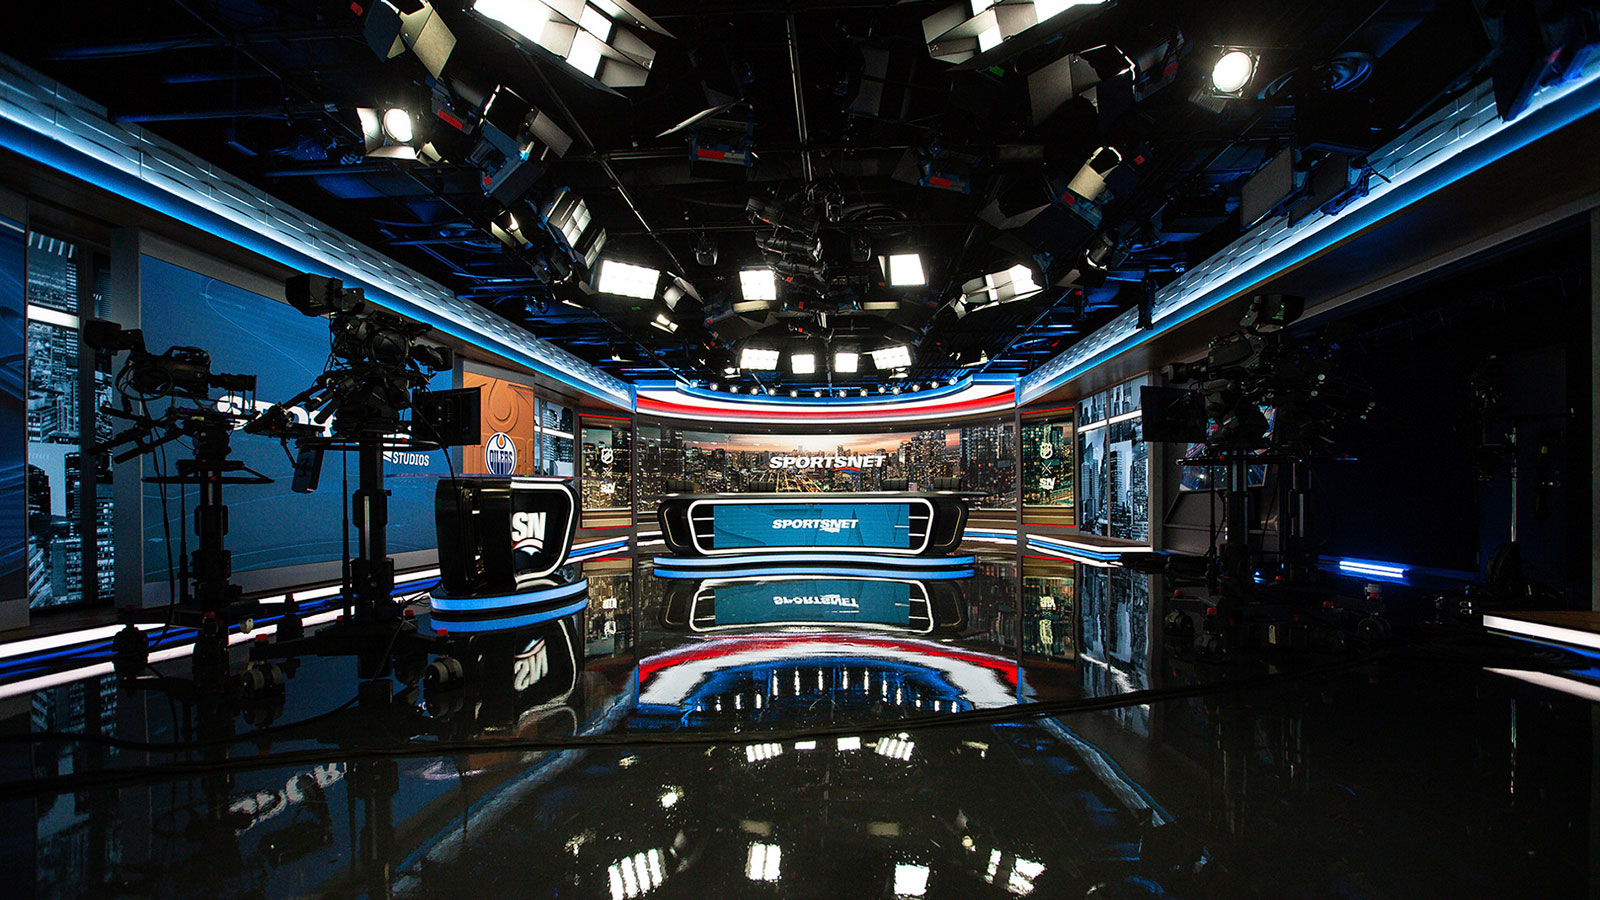 Sportsnet. Evolving a heritage building into the future of broadcasting studios